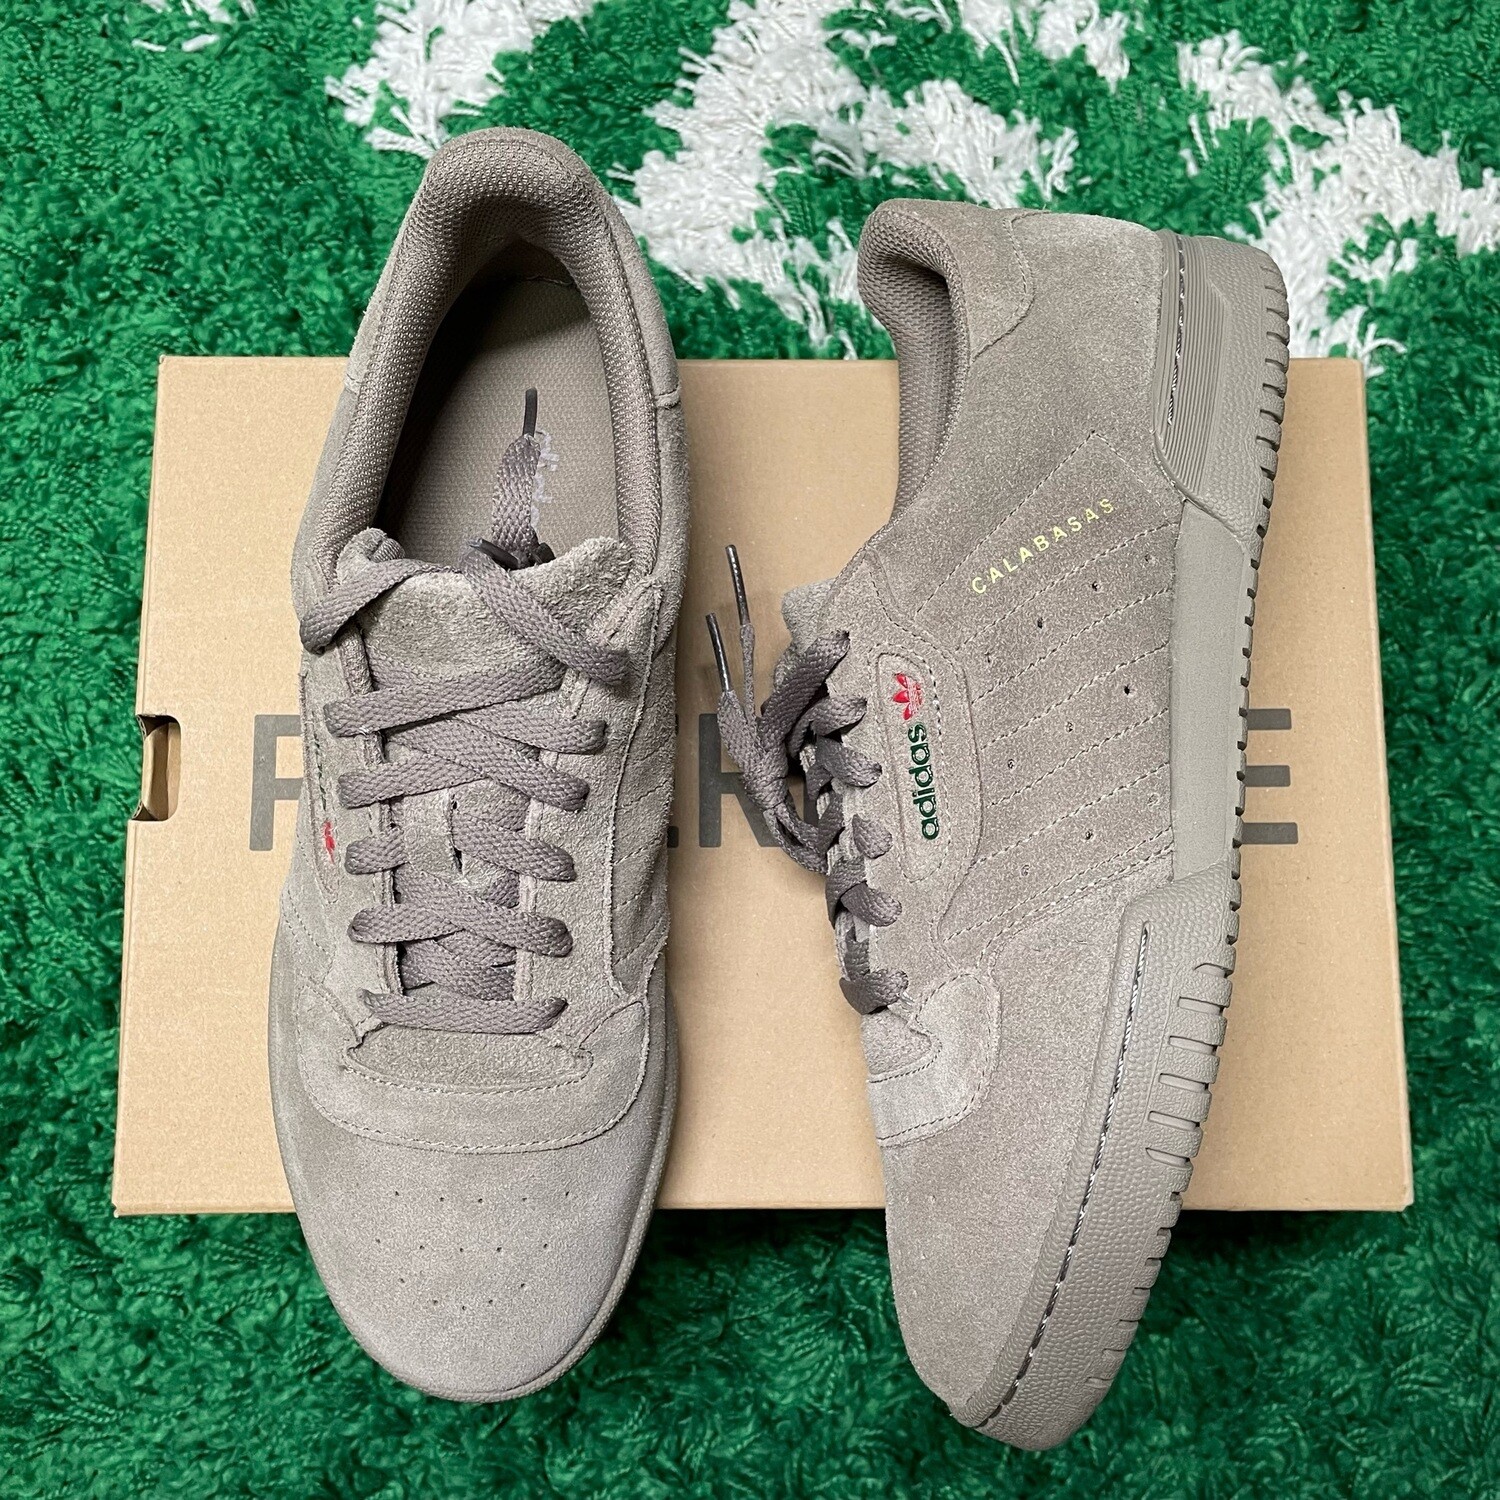 adidas Yeezy Powerphase Simple Brown Size 10M/11.5W